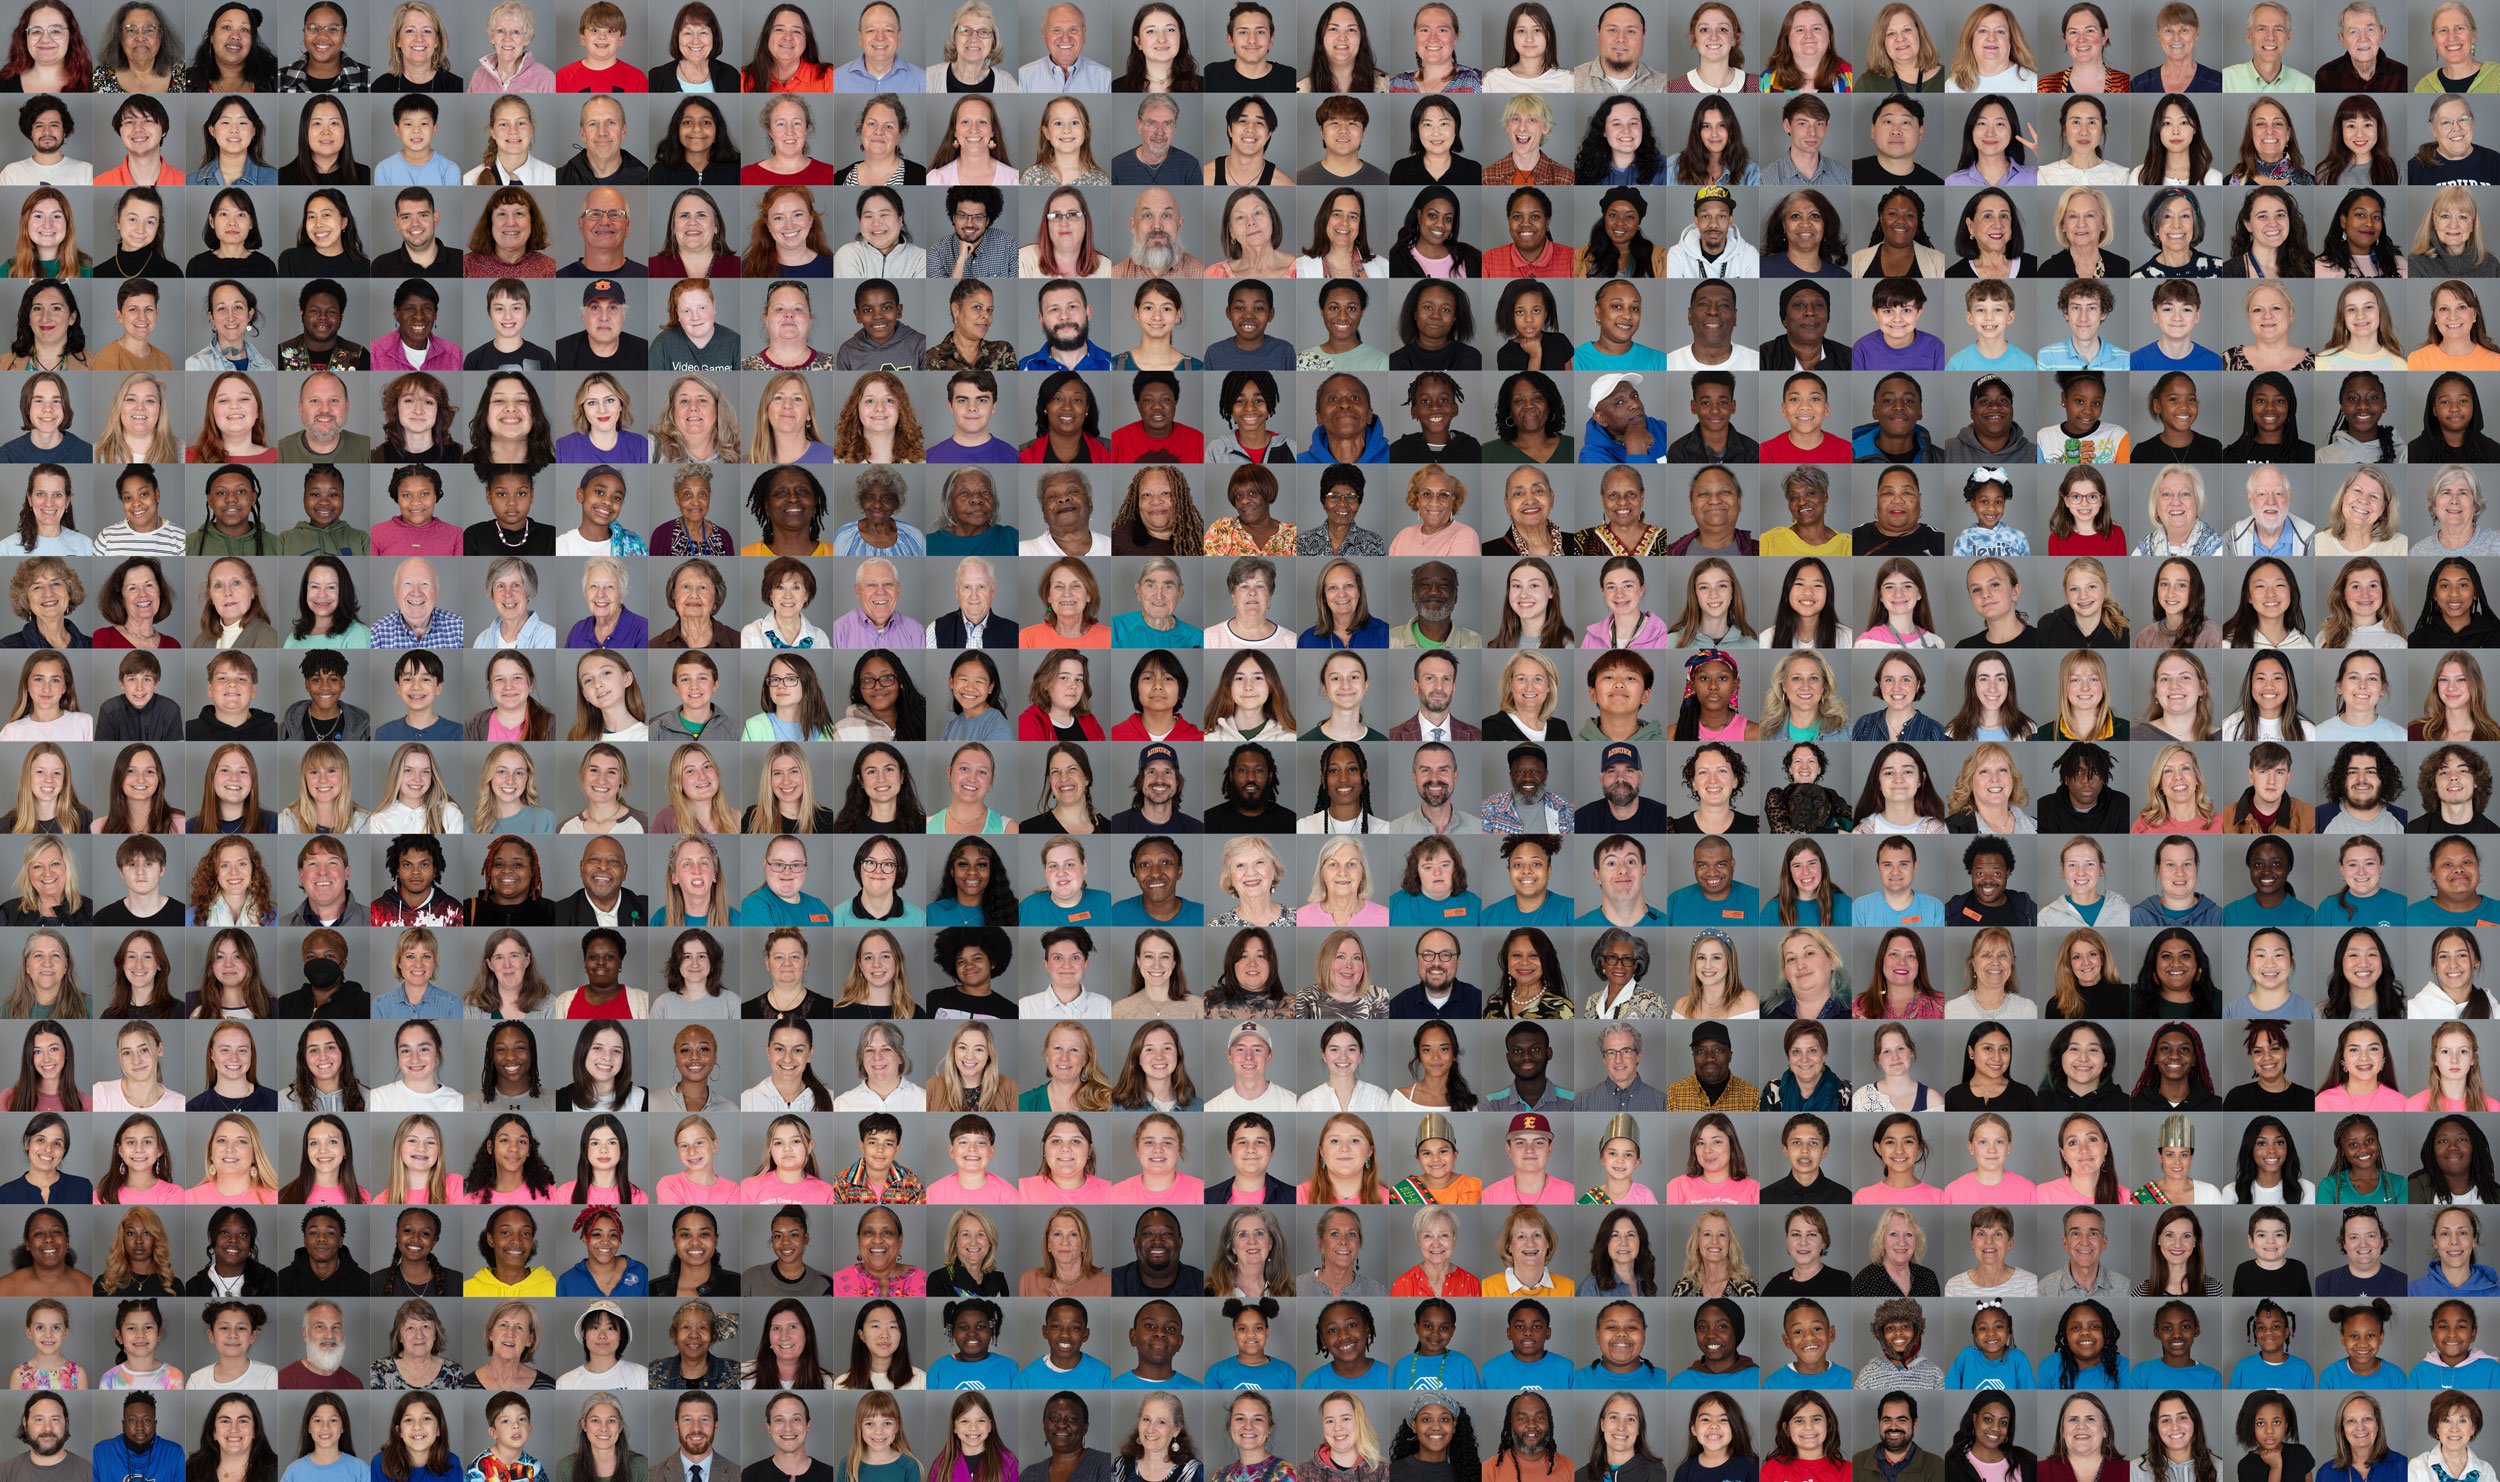 A photo mural of 450-500 people